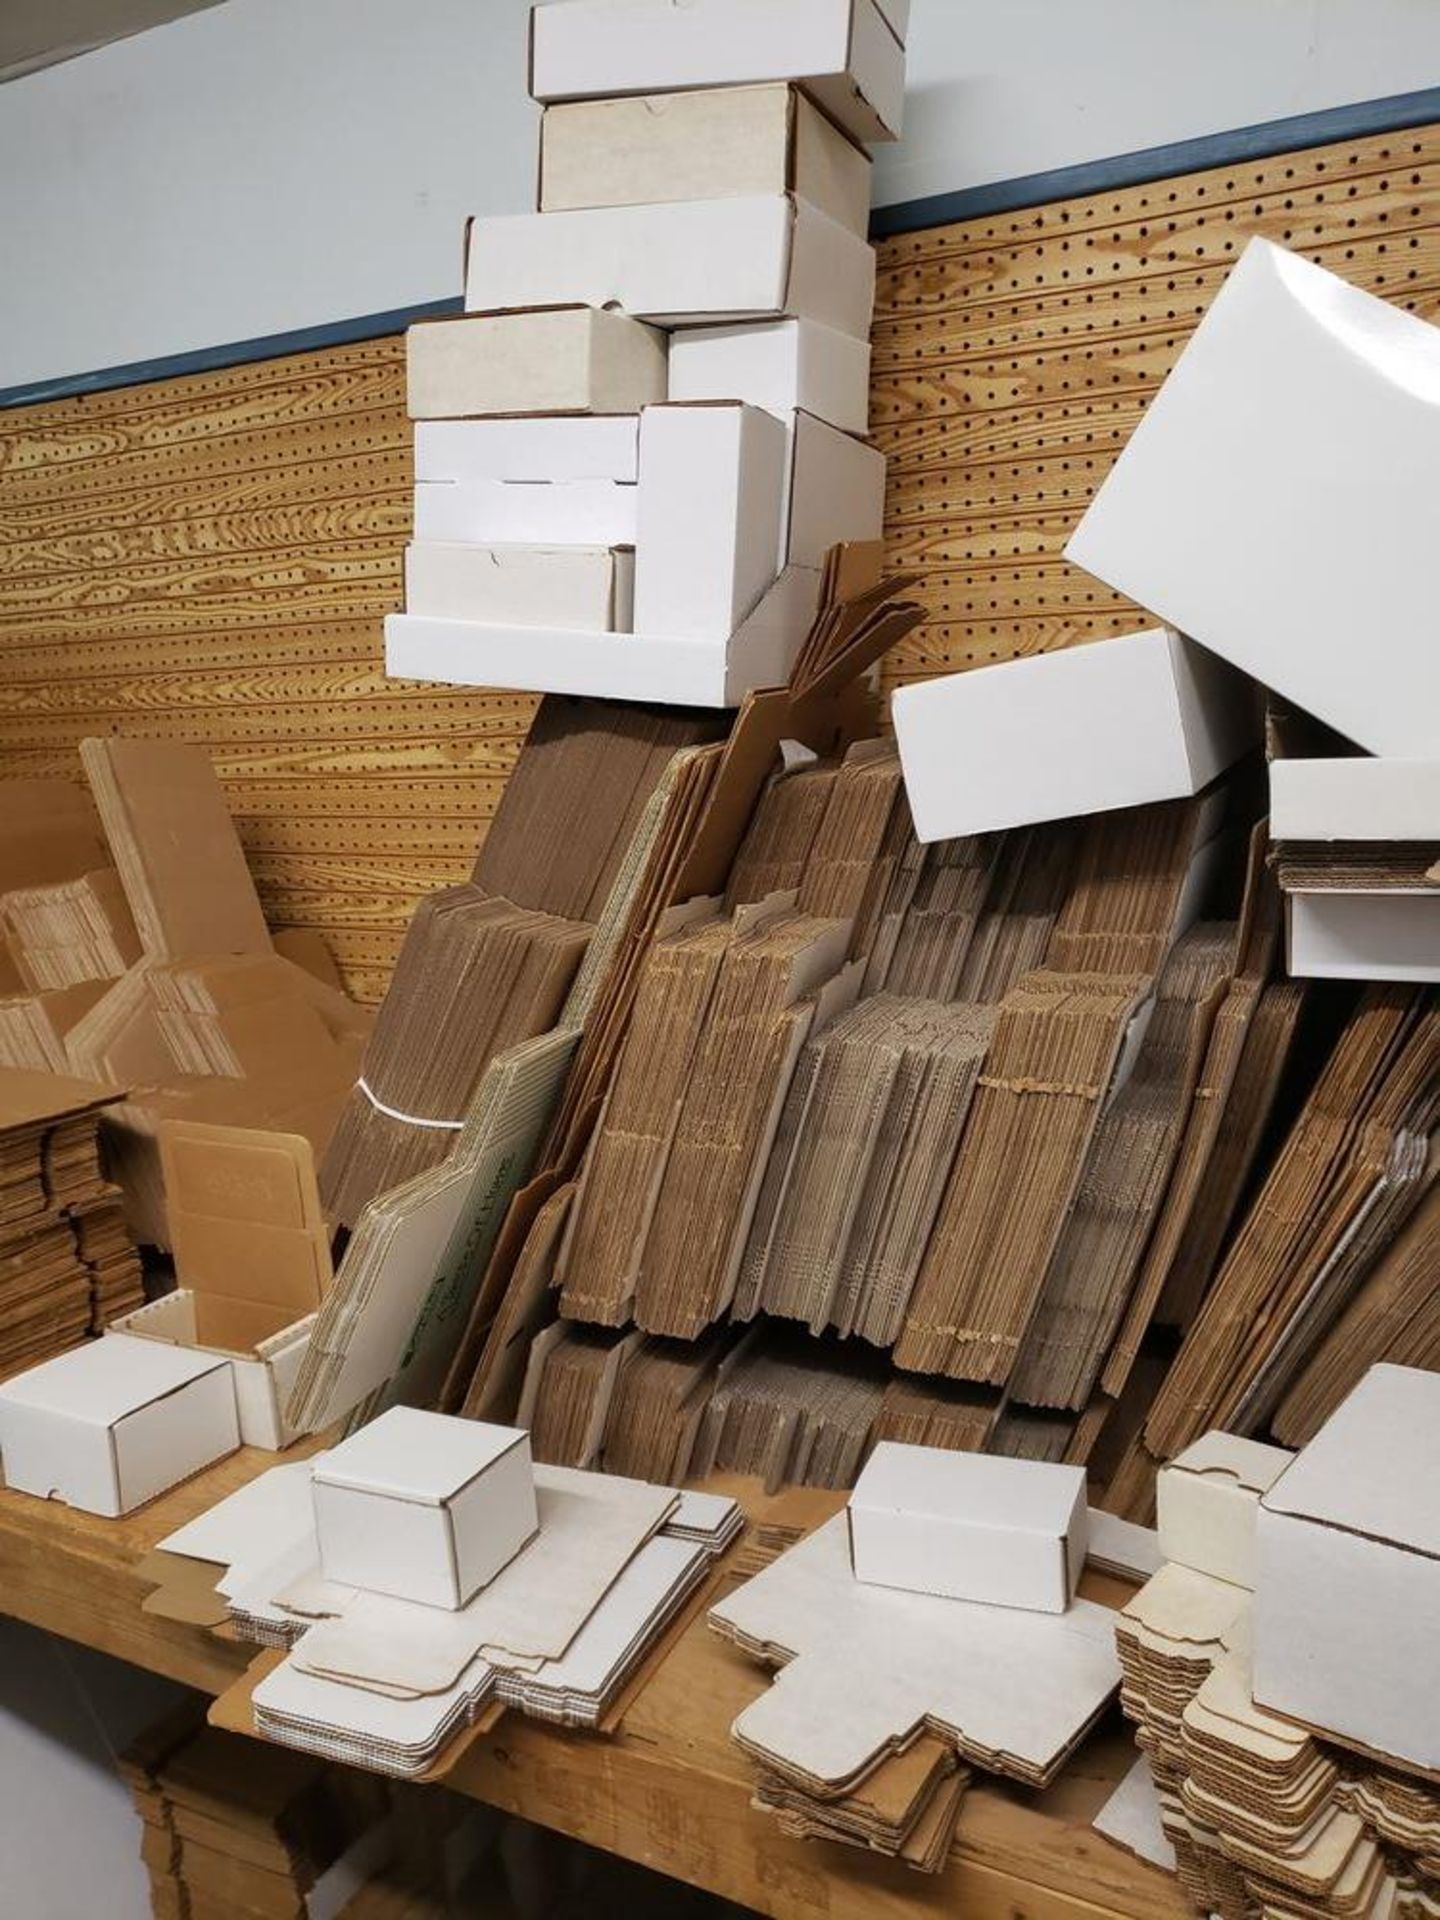 LOT OF DIECUT FOLDING BOXES - Image 5 of 6